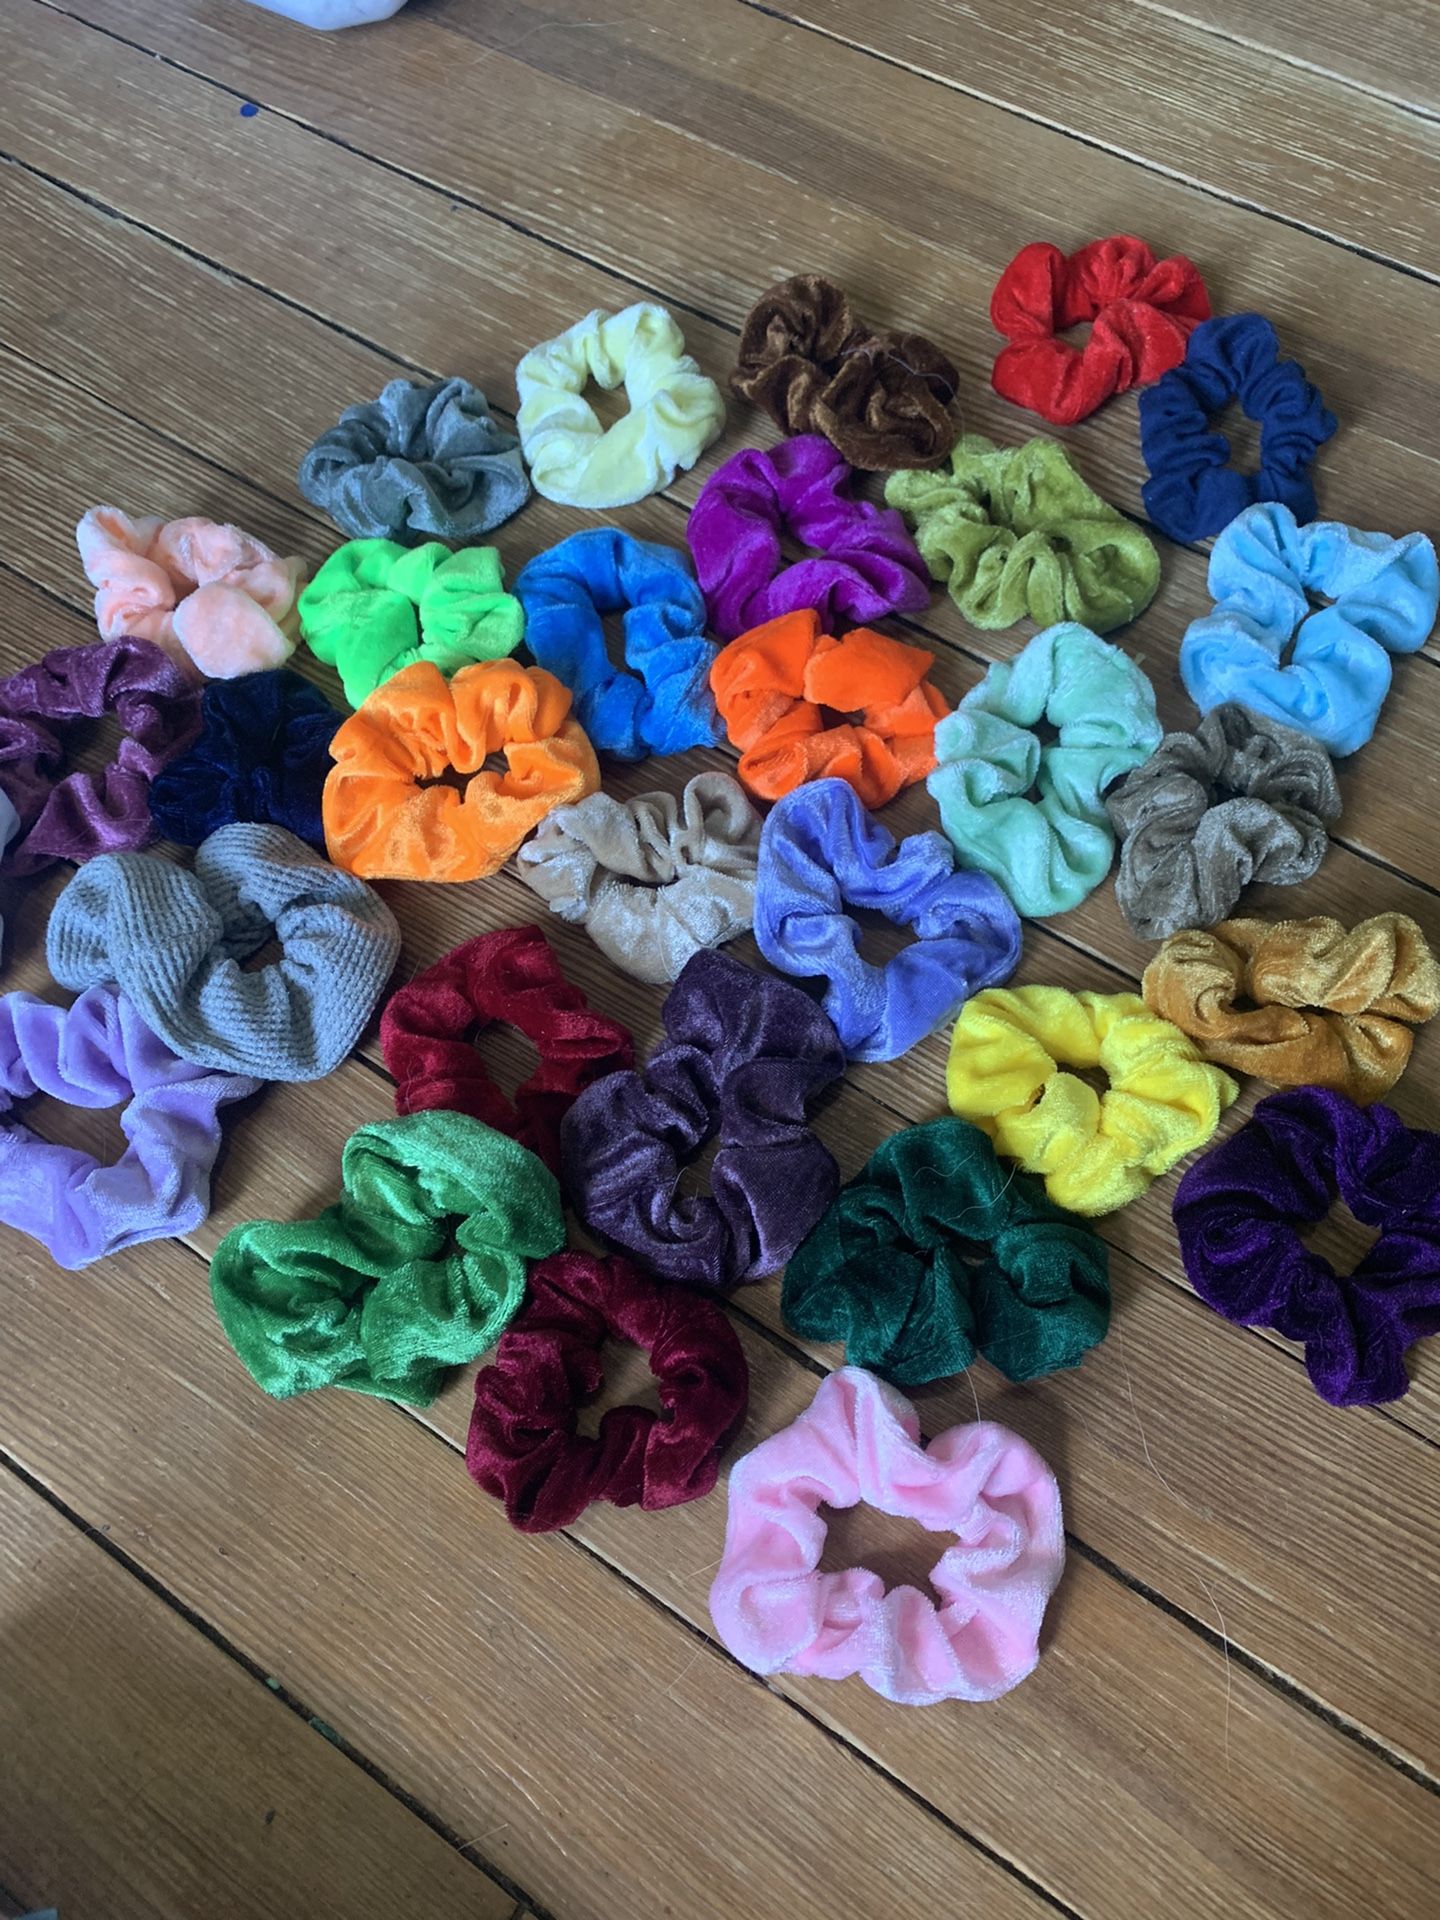 31 Pack Of Scrunchies (Never Used)